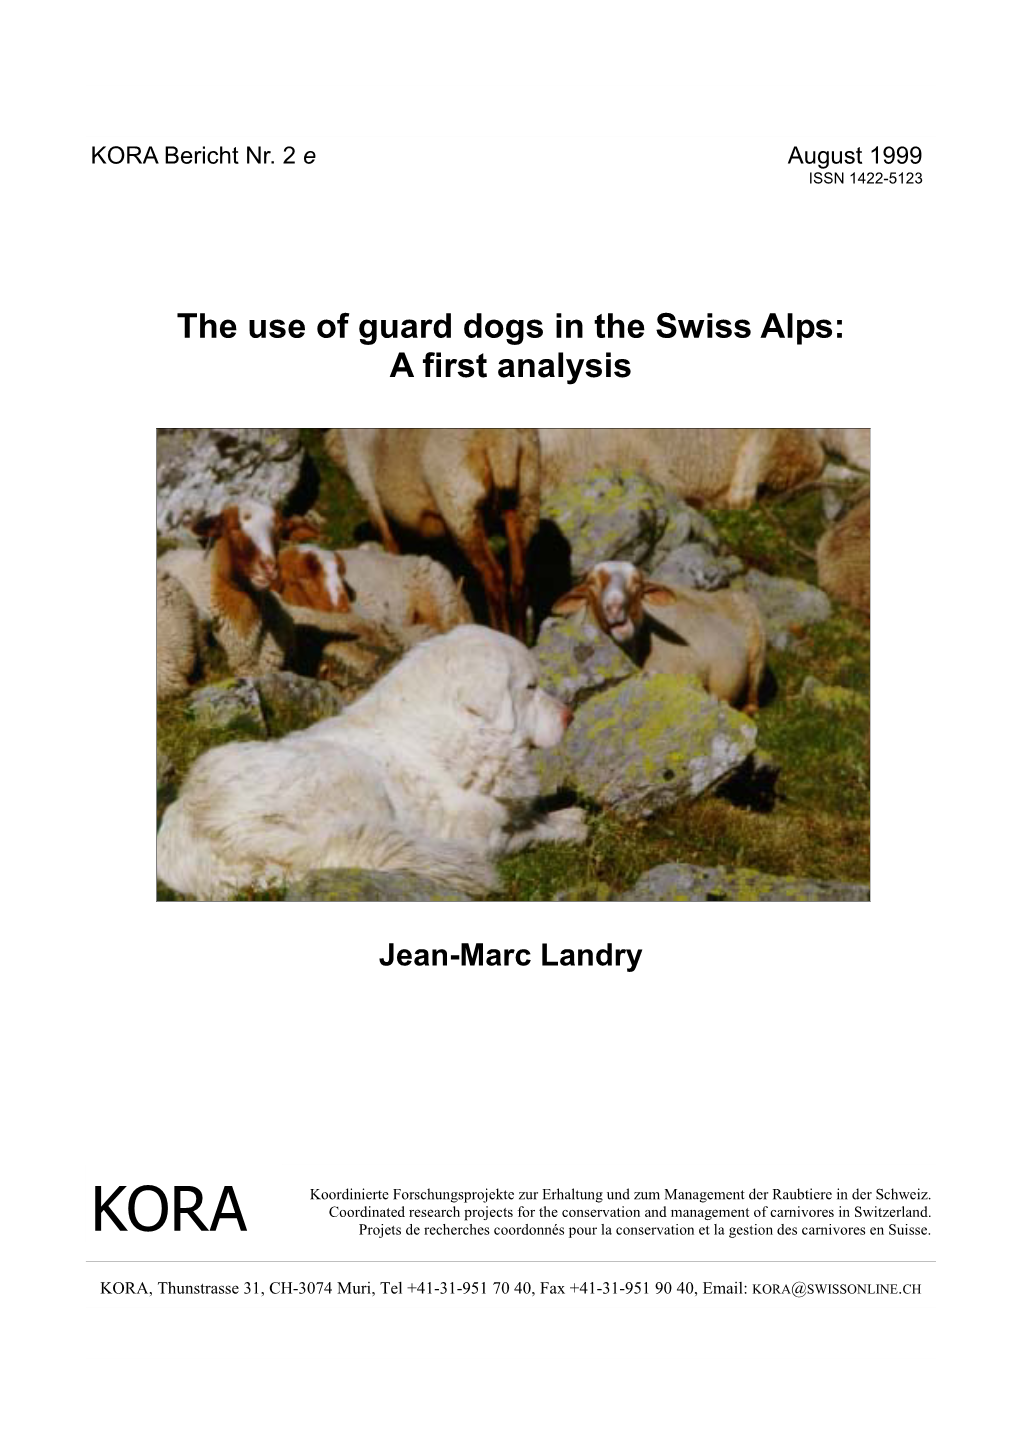 The Use of Guard Dogs in the Swiss Alps: a First Analysis